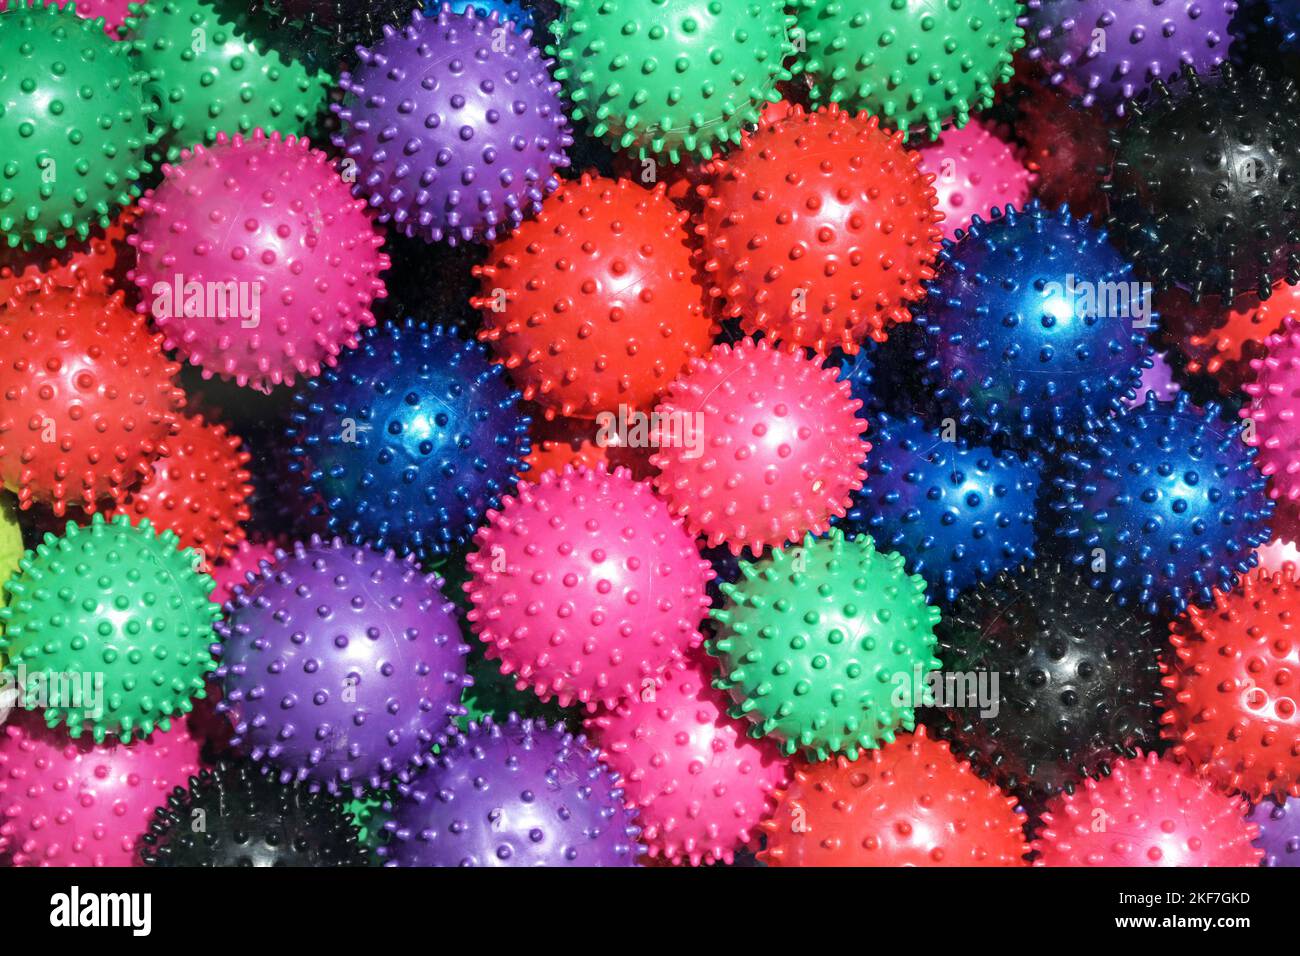 Heap of colorful massage balls with nubs, full frame image Stock Photo